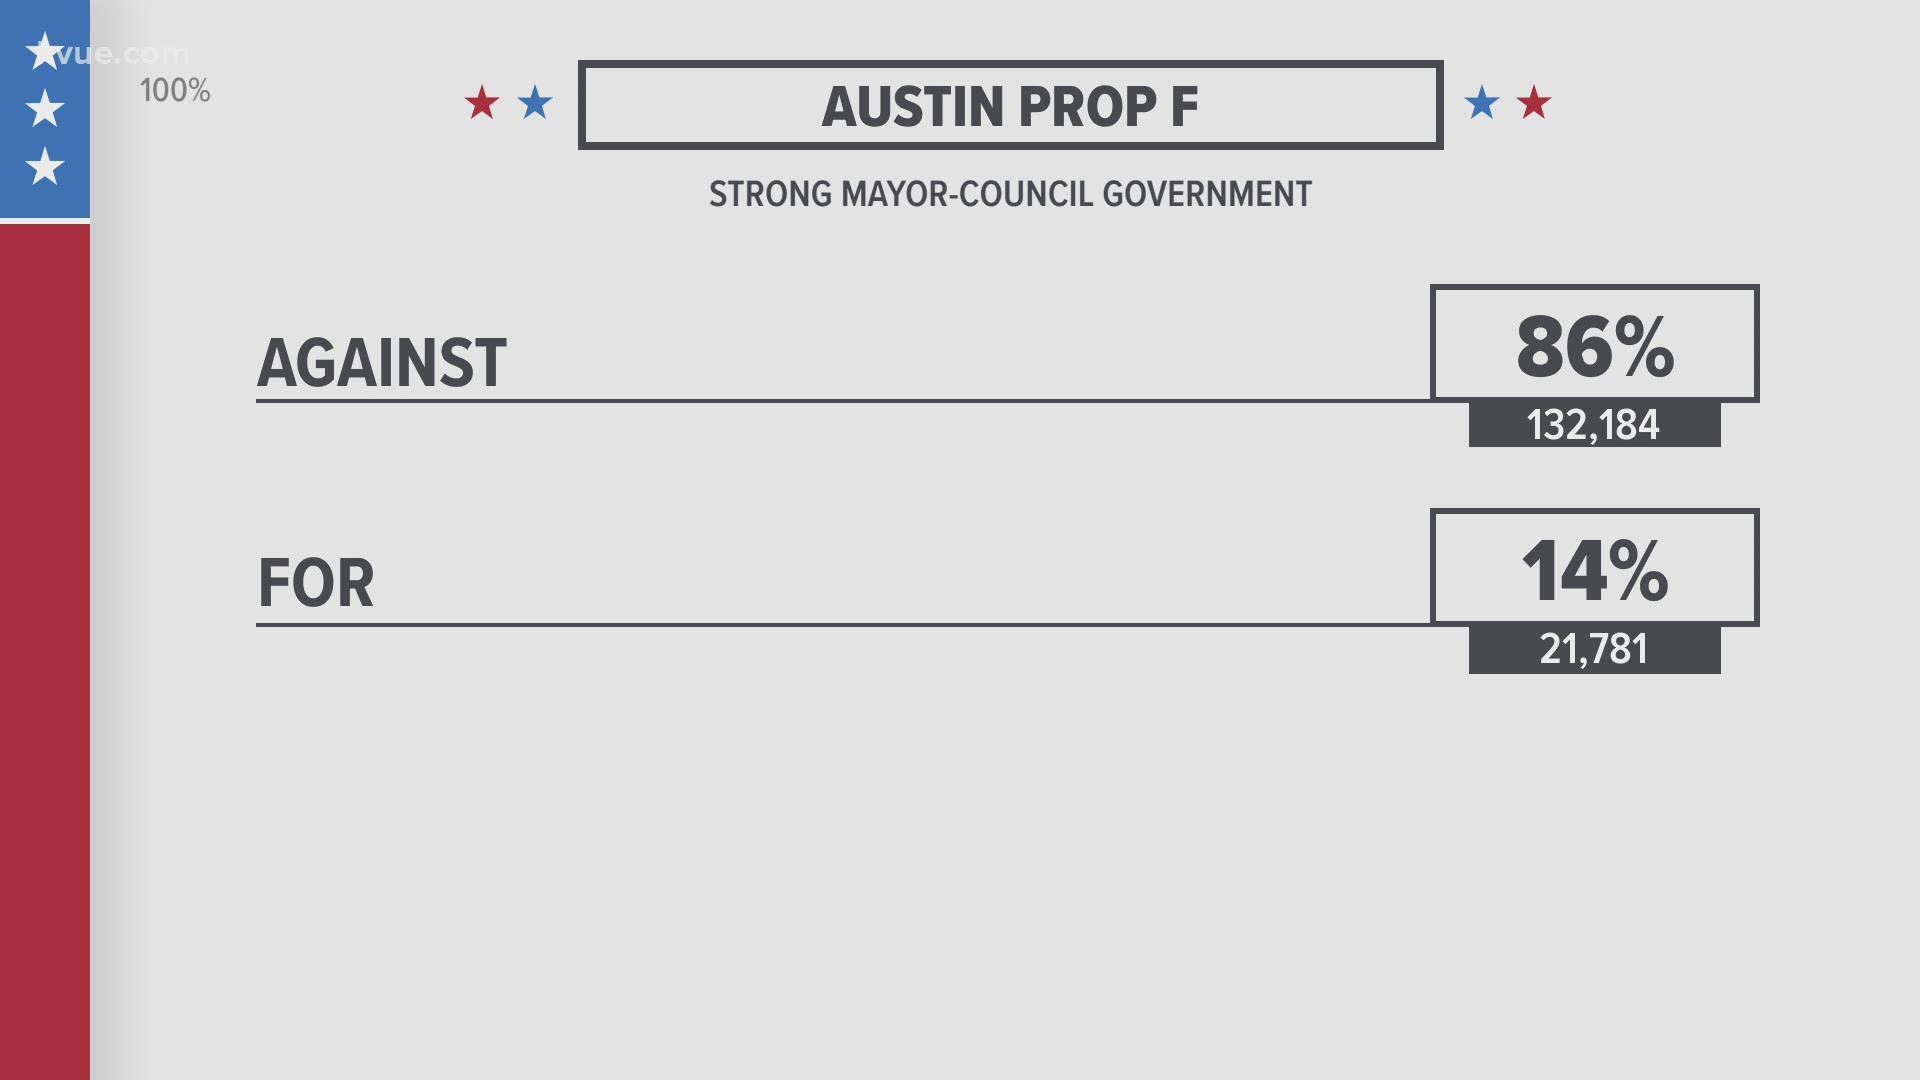 The majority of Austin voters were against eliminating the city manager position and giving the mayor veto power over the city council.